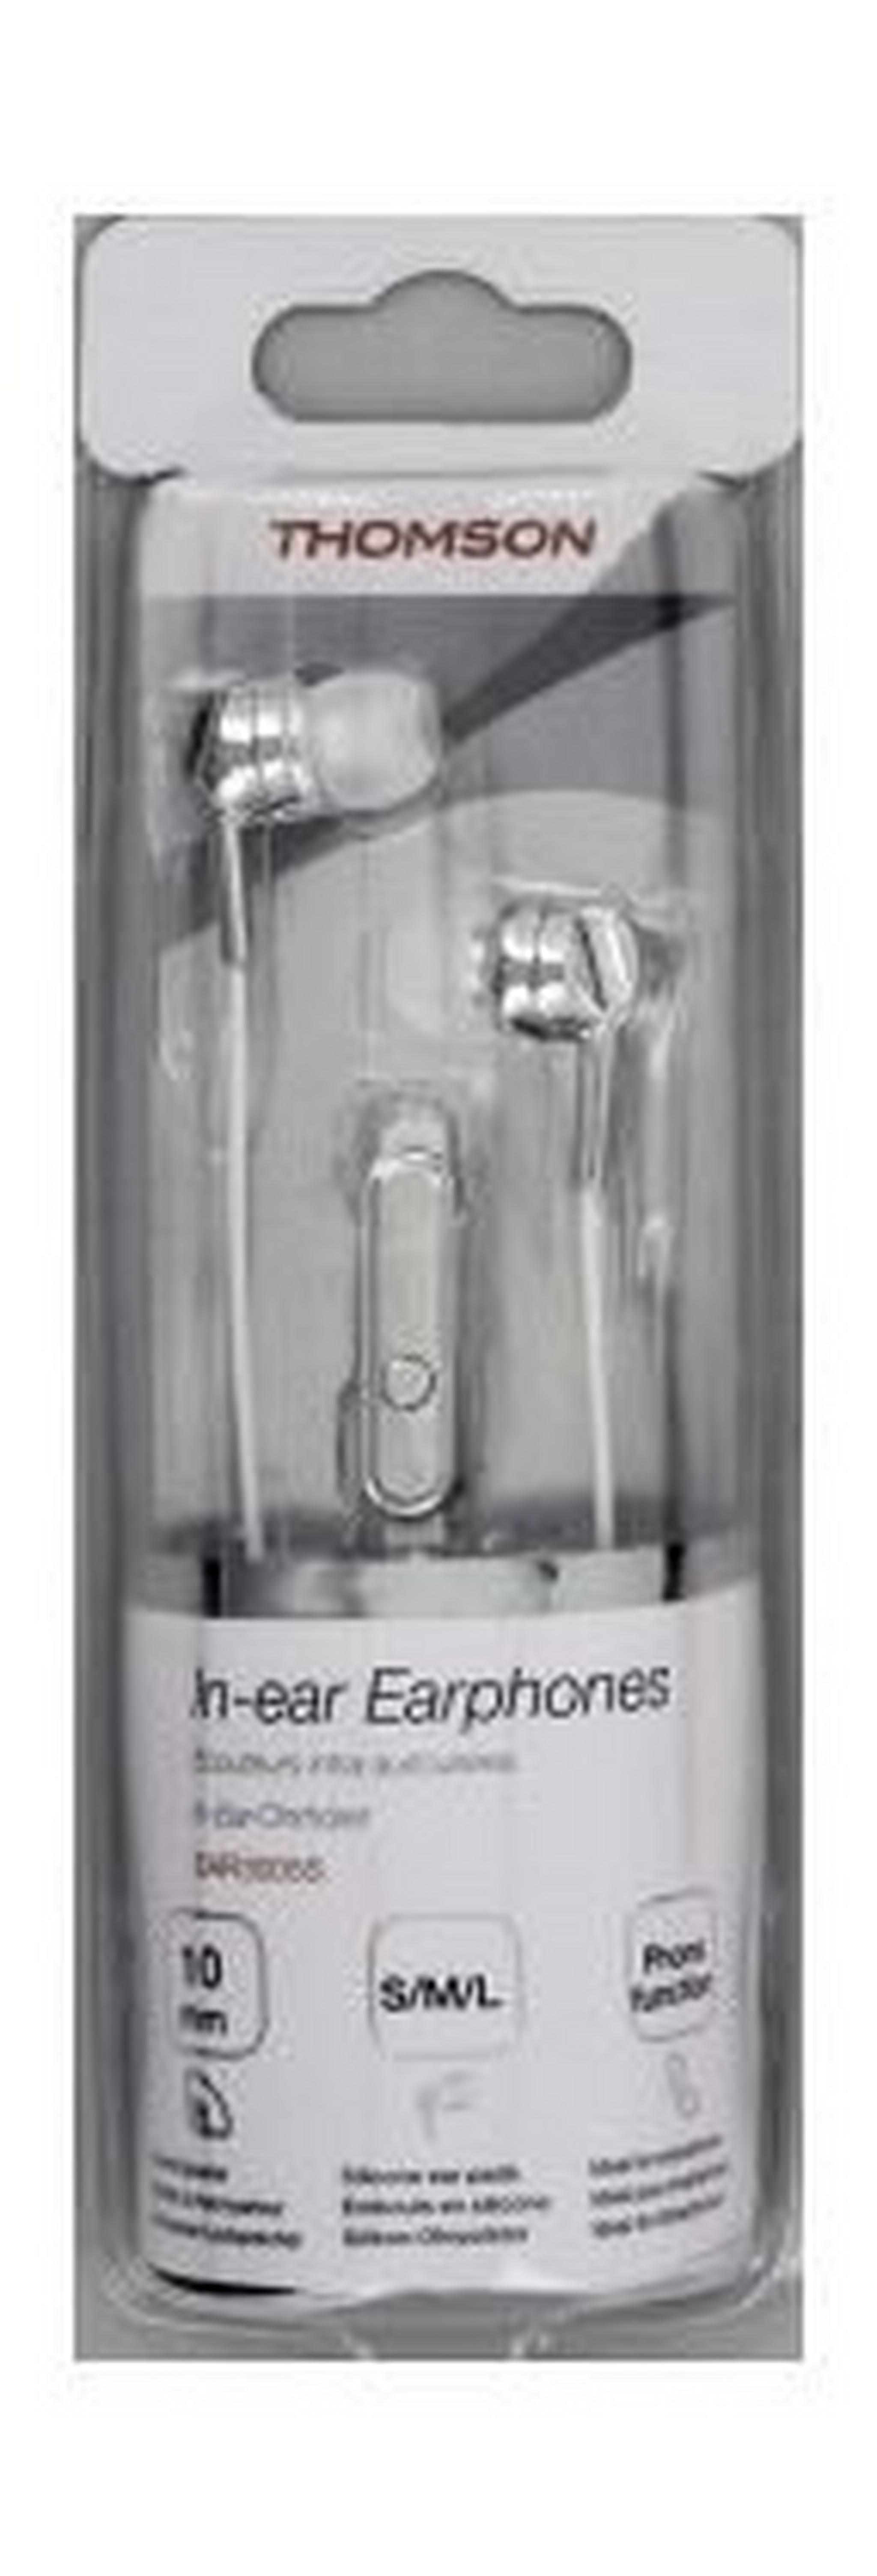 Thomson In-ear Wired Earphone with Microphone (132496) - SIlver